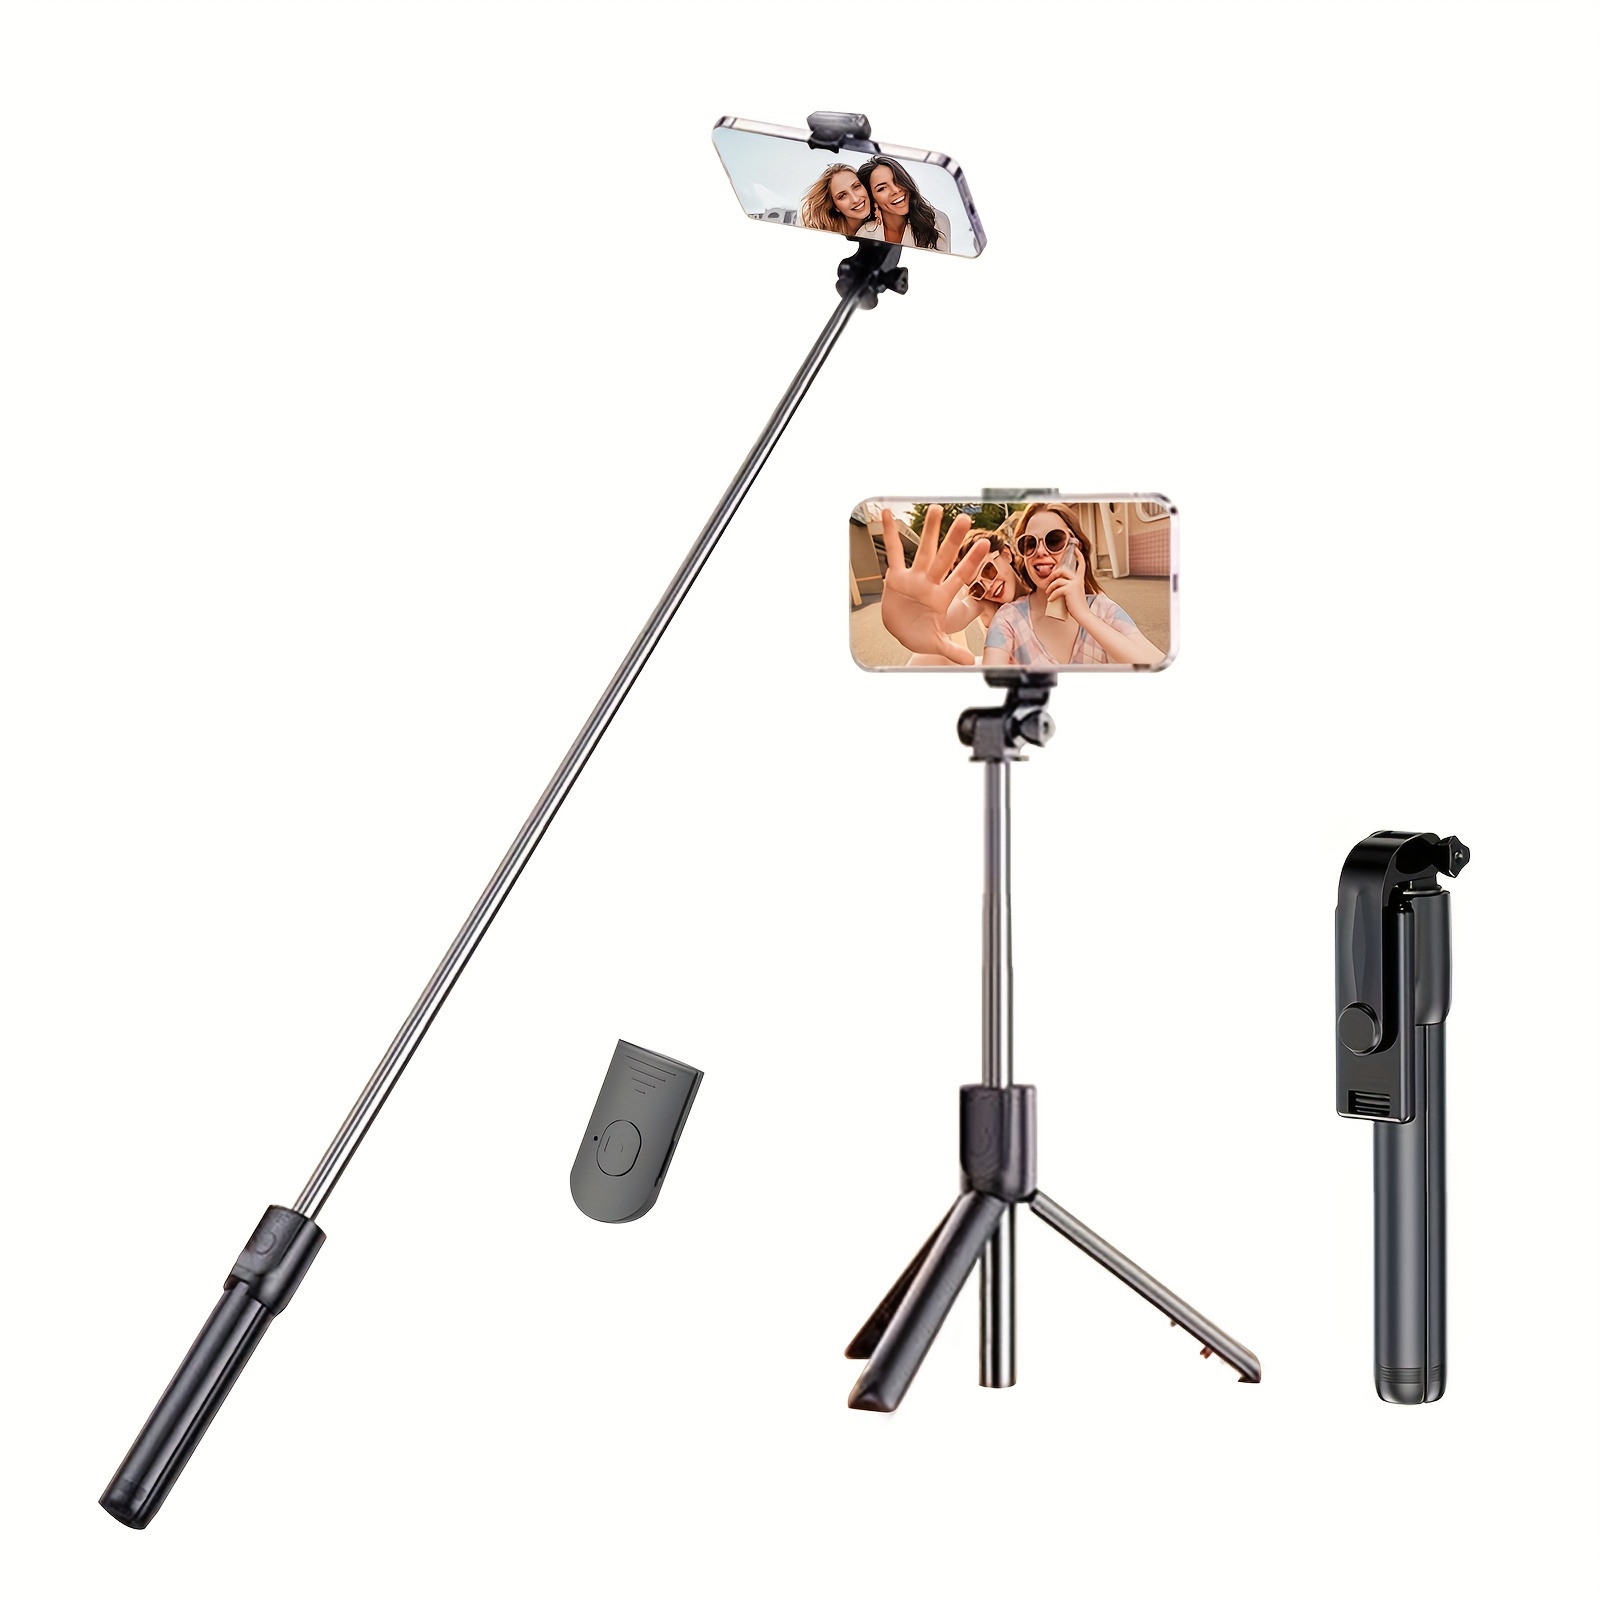 

43 Inch Portable Selfie Stick Tripod With Wireless Remote, Extendable And Rotatable, Compatible With Smartphones, Battery Powered, Non-rechargeable Button Battery, Wireless Operation Up To 36v - Black